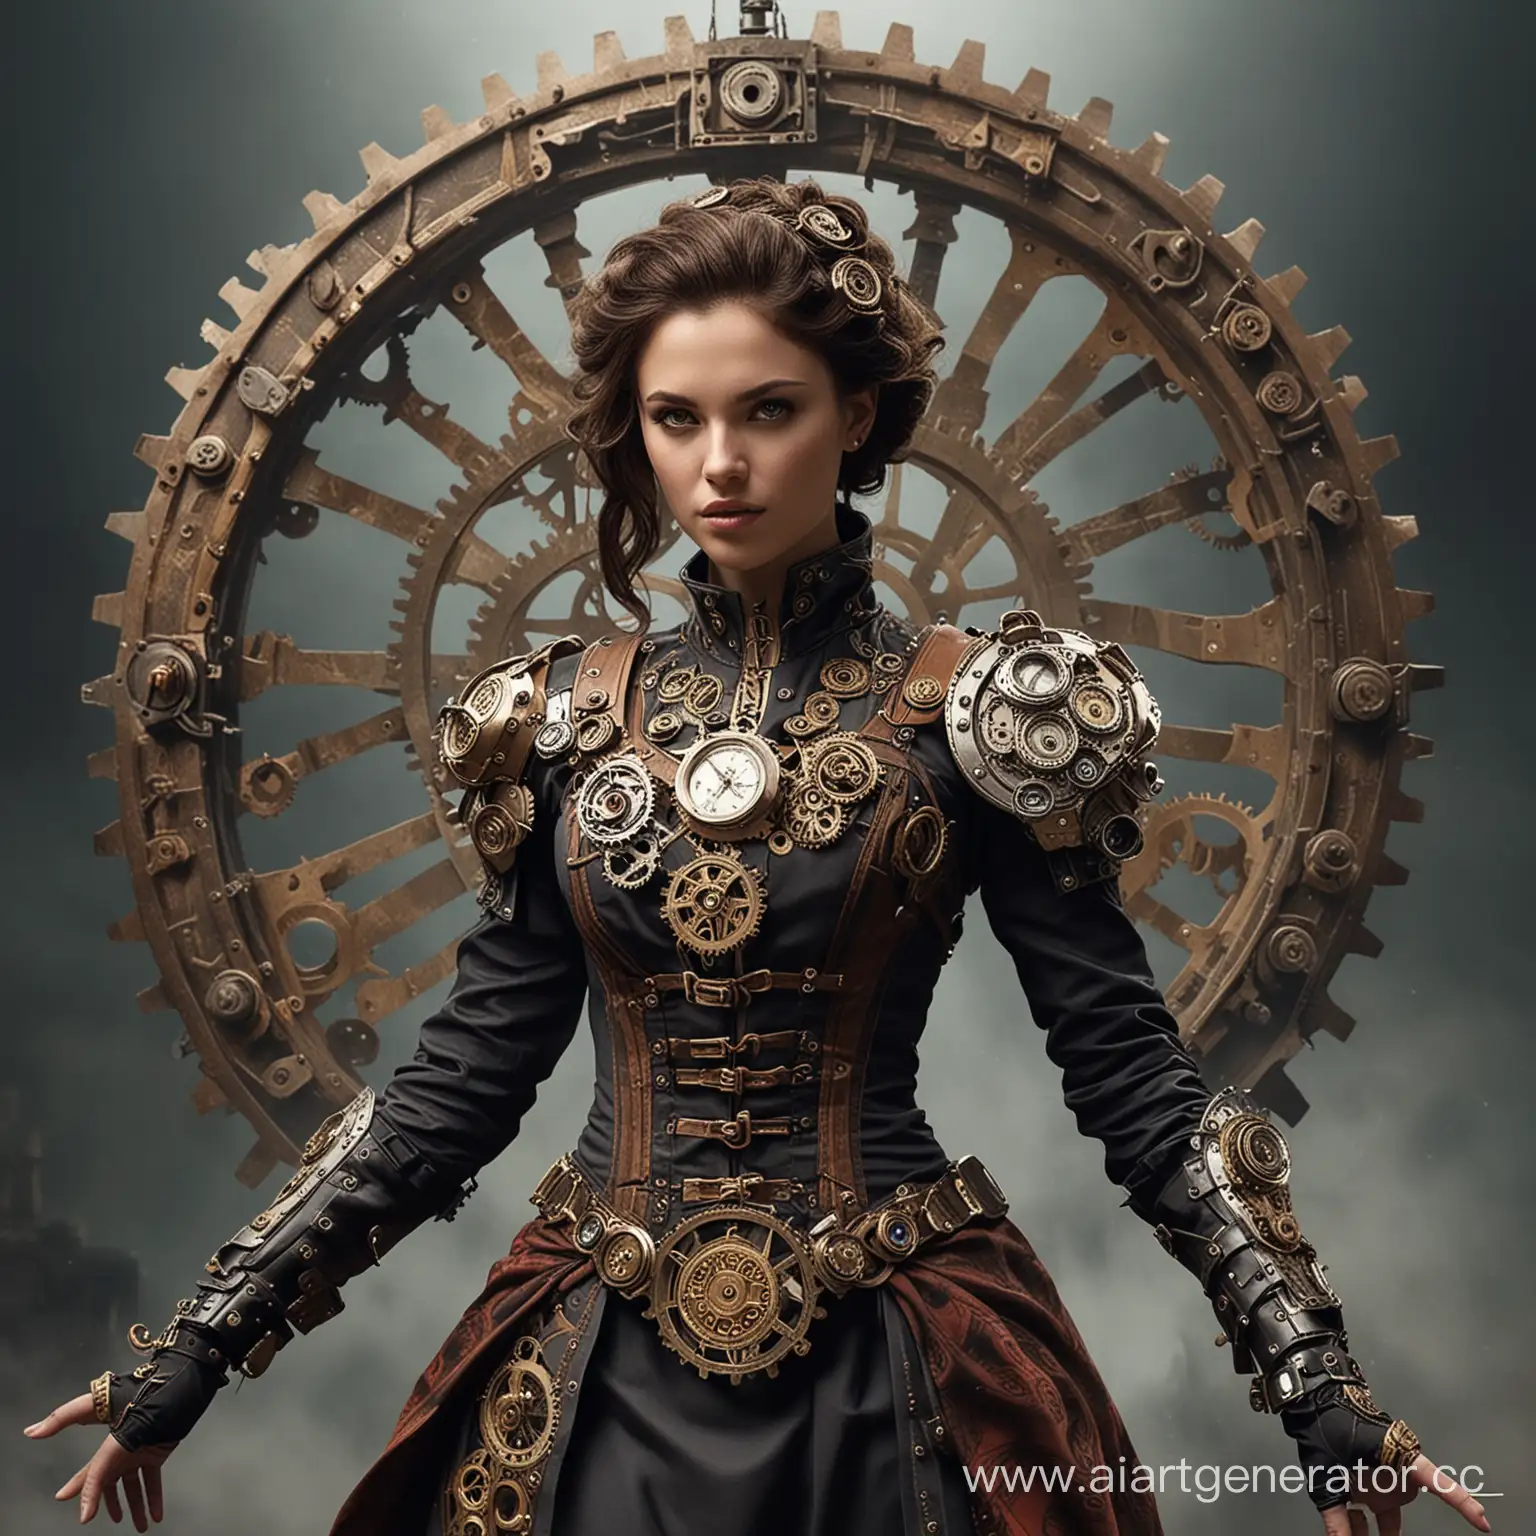 Chrono Conqueror: Manipulates time to alter events and rewrite history. Costume: Clockwork-inspired attire with gears and cogs protruding from the fabric, a swirling vortex motif representing the manipulation of time...  Make it cinematic 